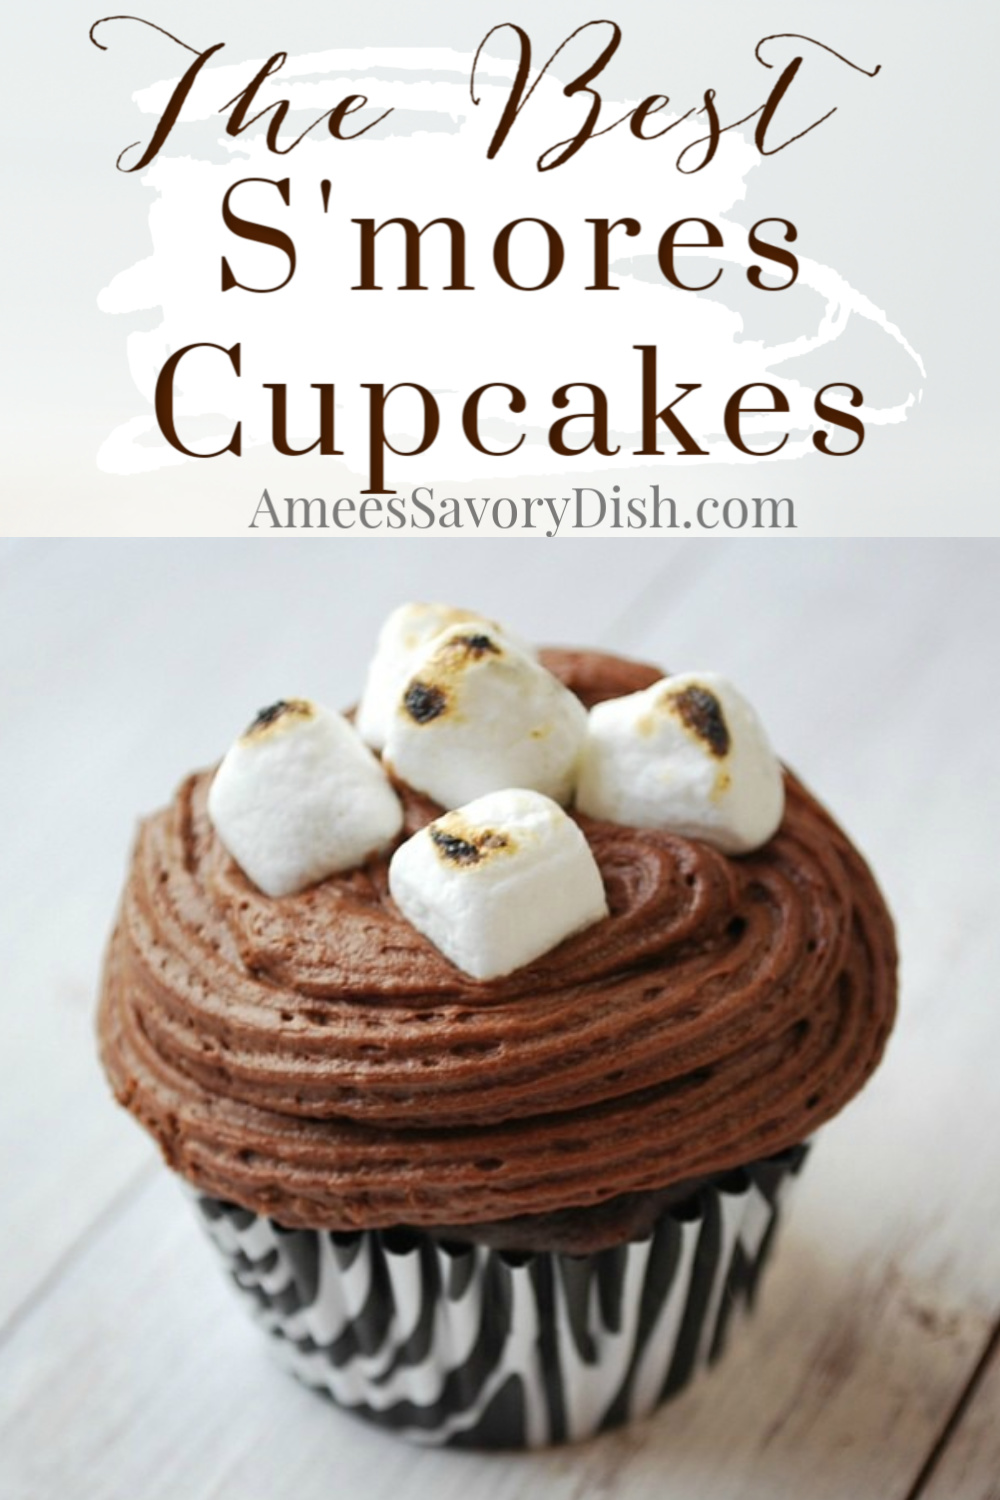 A moist and delicious recipe for homemade s'mores cupcakes with graham cracker base, chocolate frosting, and roasted marshmallows. #cupcakerecipe #cupcakes #s'morescupcakes #chocolatecupcakes via @Ameessavorydish